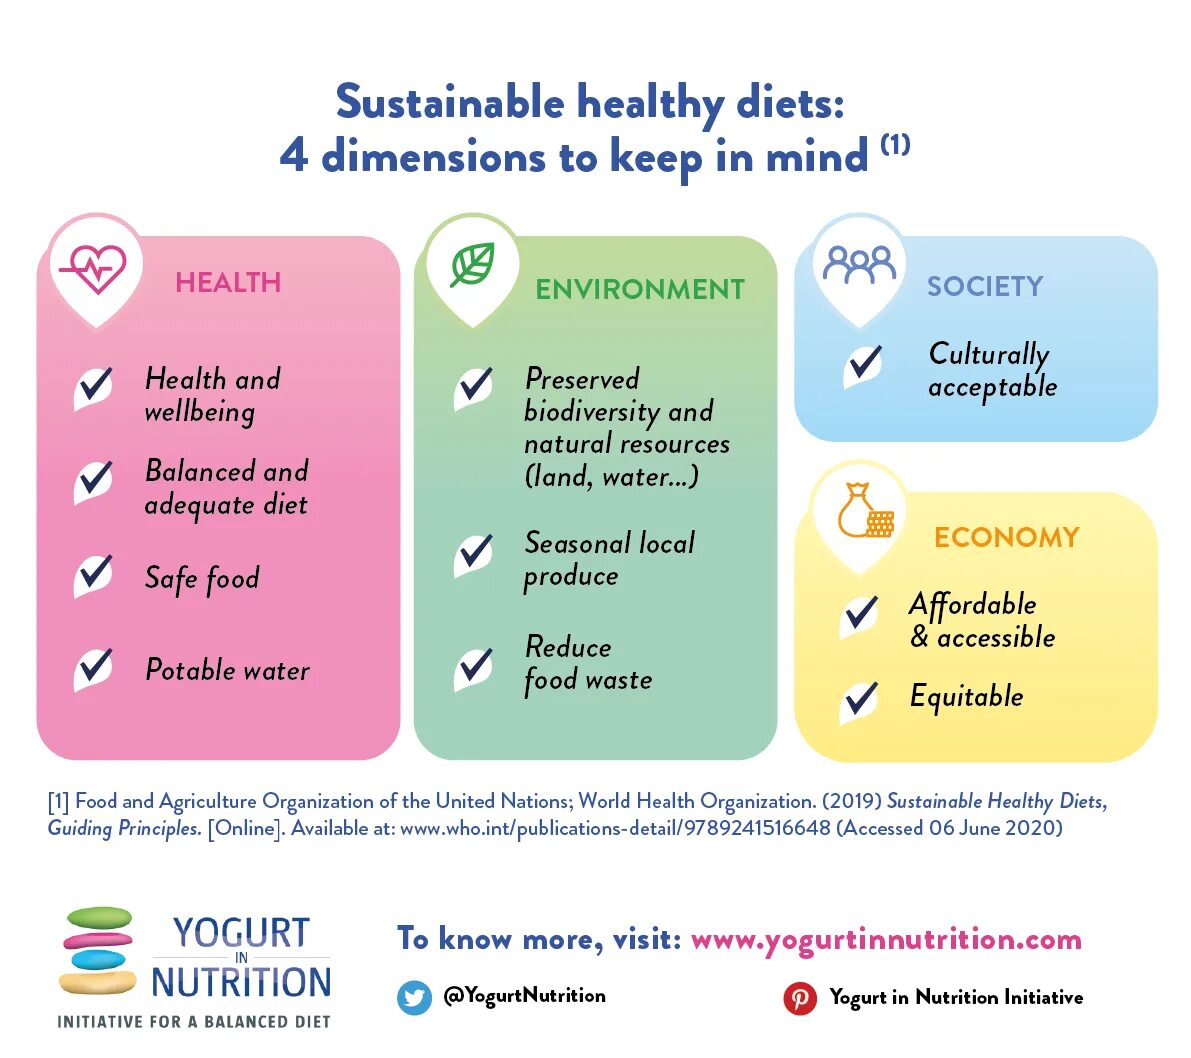 Sustainability Health. Sustainable eating. Sustainable use of natural resources. Lifestyles of Health and Sustainability.